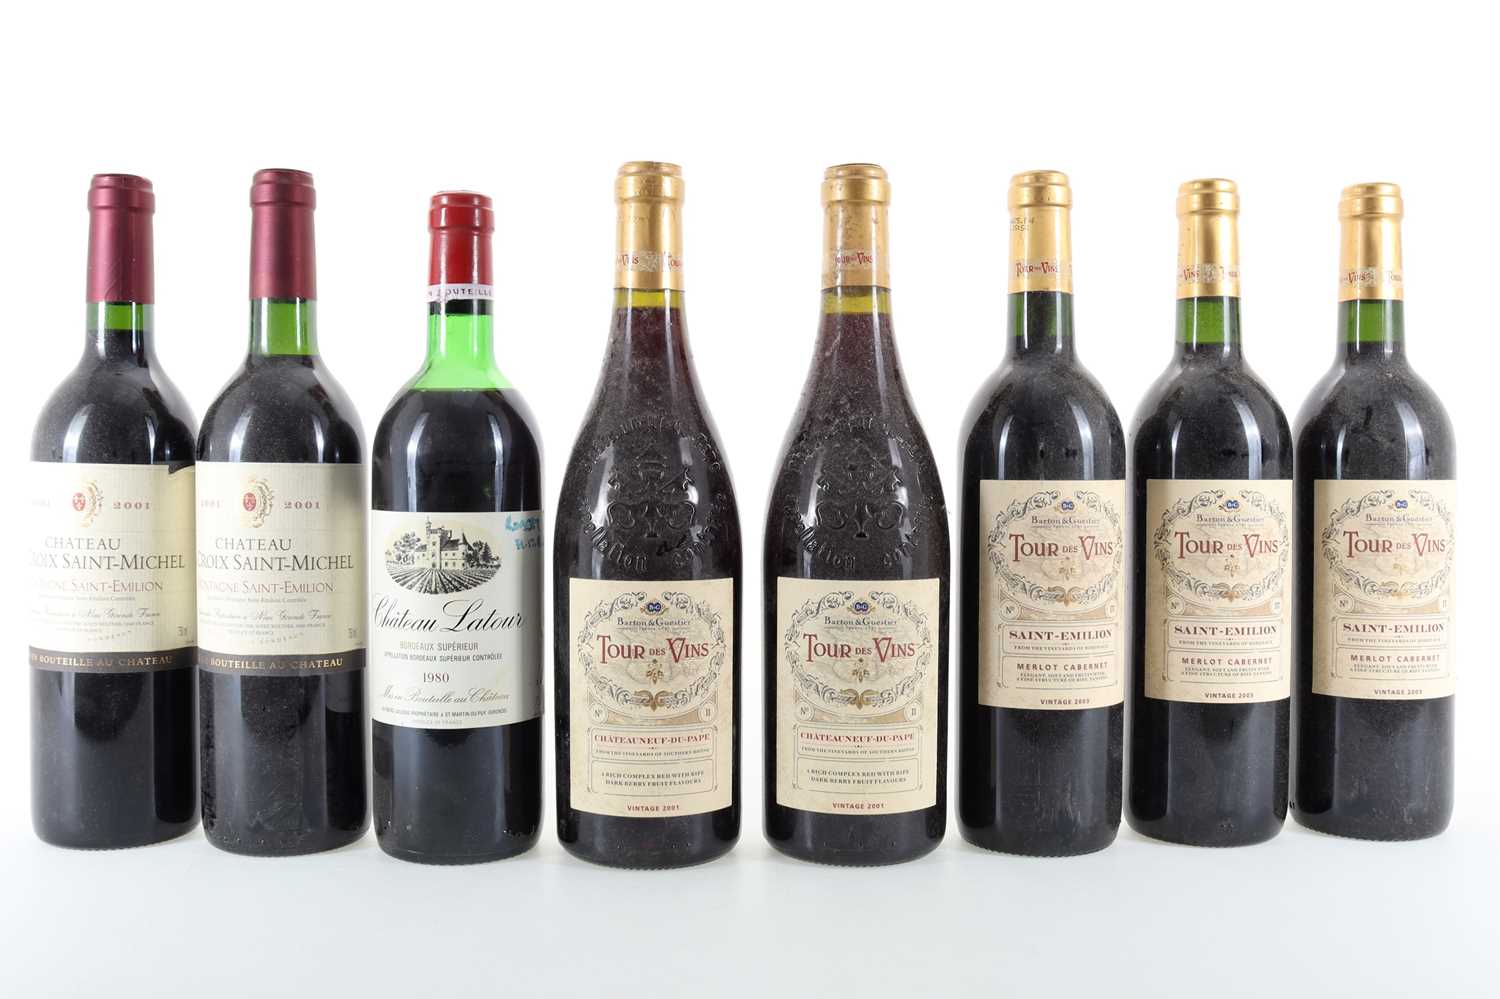 8 BOTTLES OF VINTAGE FRENCH RED WINE INCLUDING 2 BOTTLES OF BARTON & GUESTIER 2001 CHATEAUNEUF-DU-PA